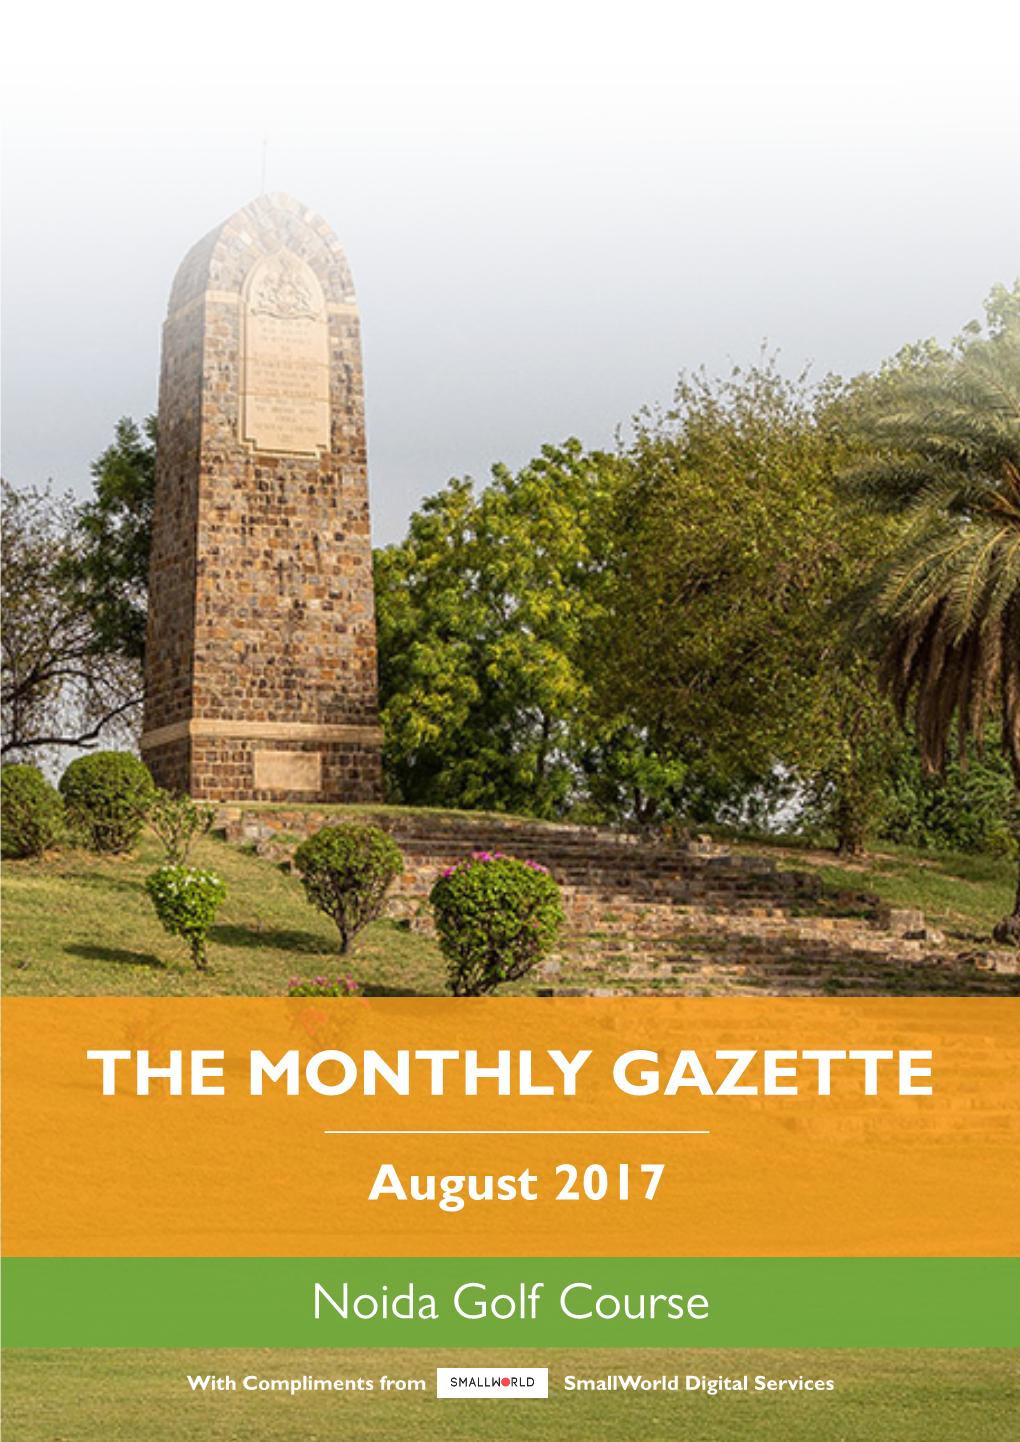 THE MONTHLY GAZETTE August 2017